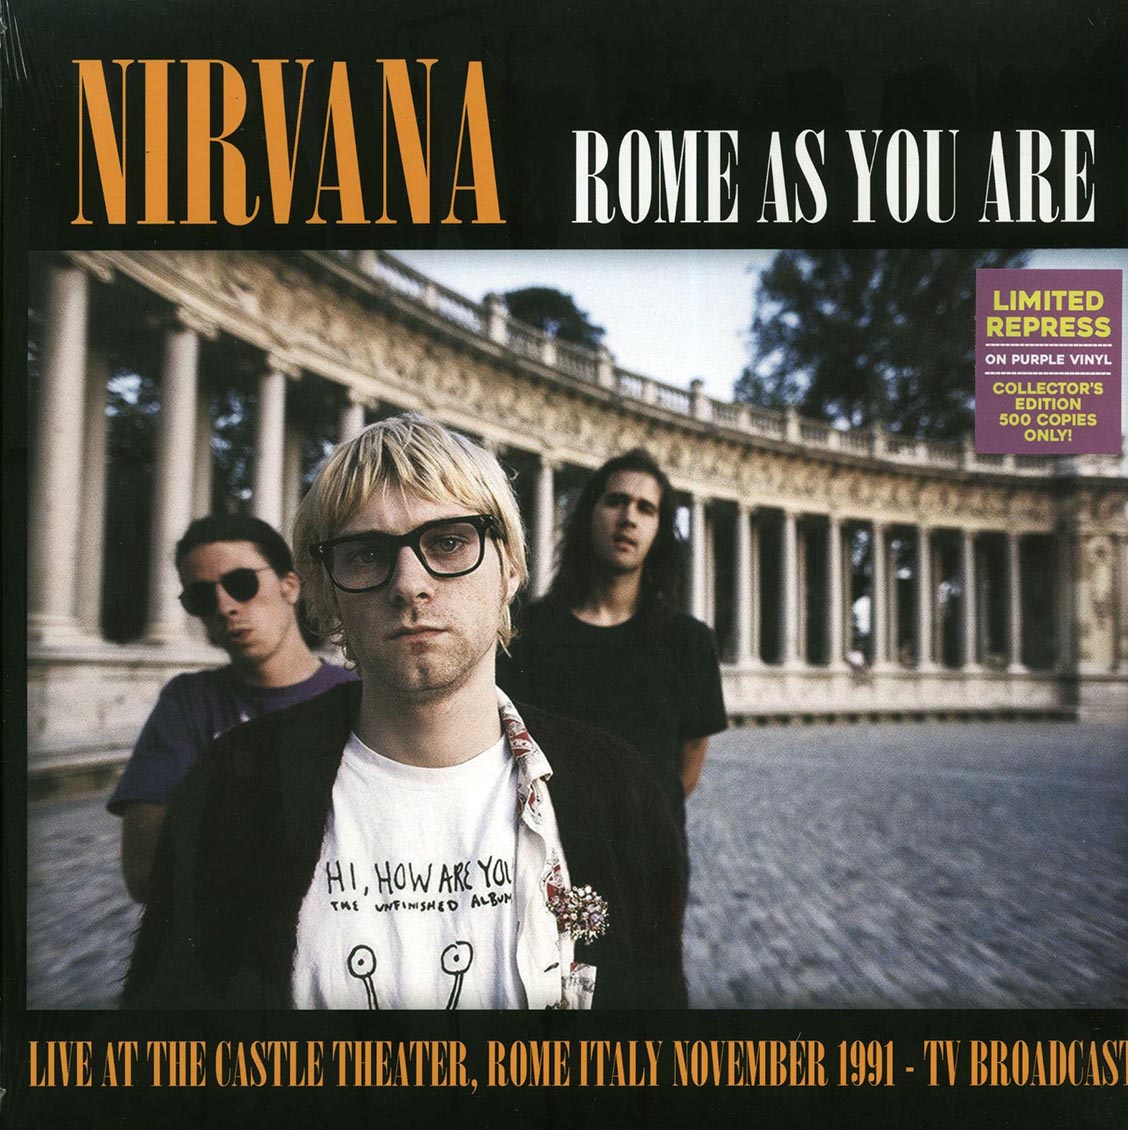 Nirvana - Rome As You Are: Live At The Castle Theatre, Rome, Italy, November 1991 TV Broadcast (ltd. 500 copies made) - Vinyl LP